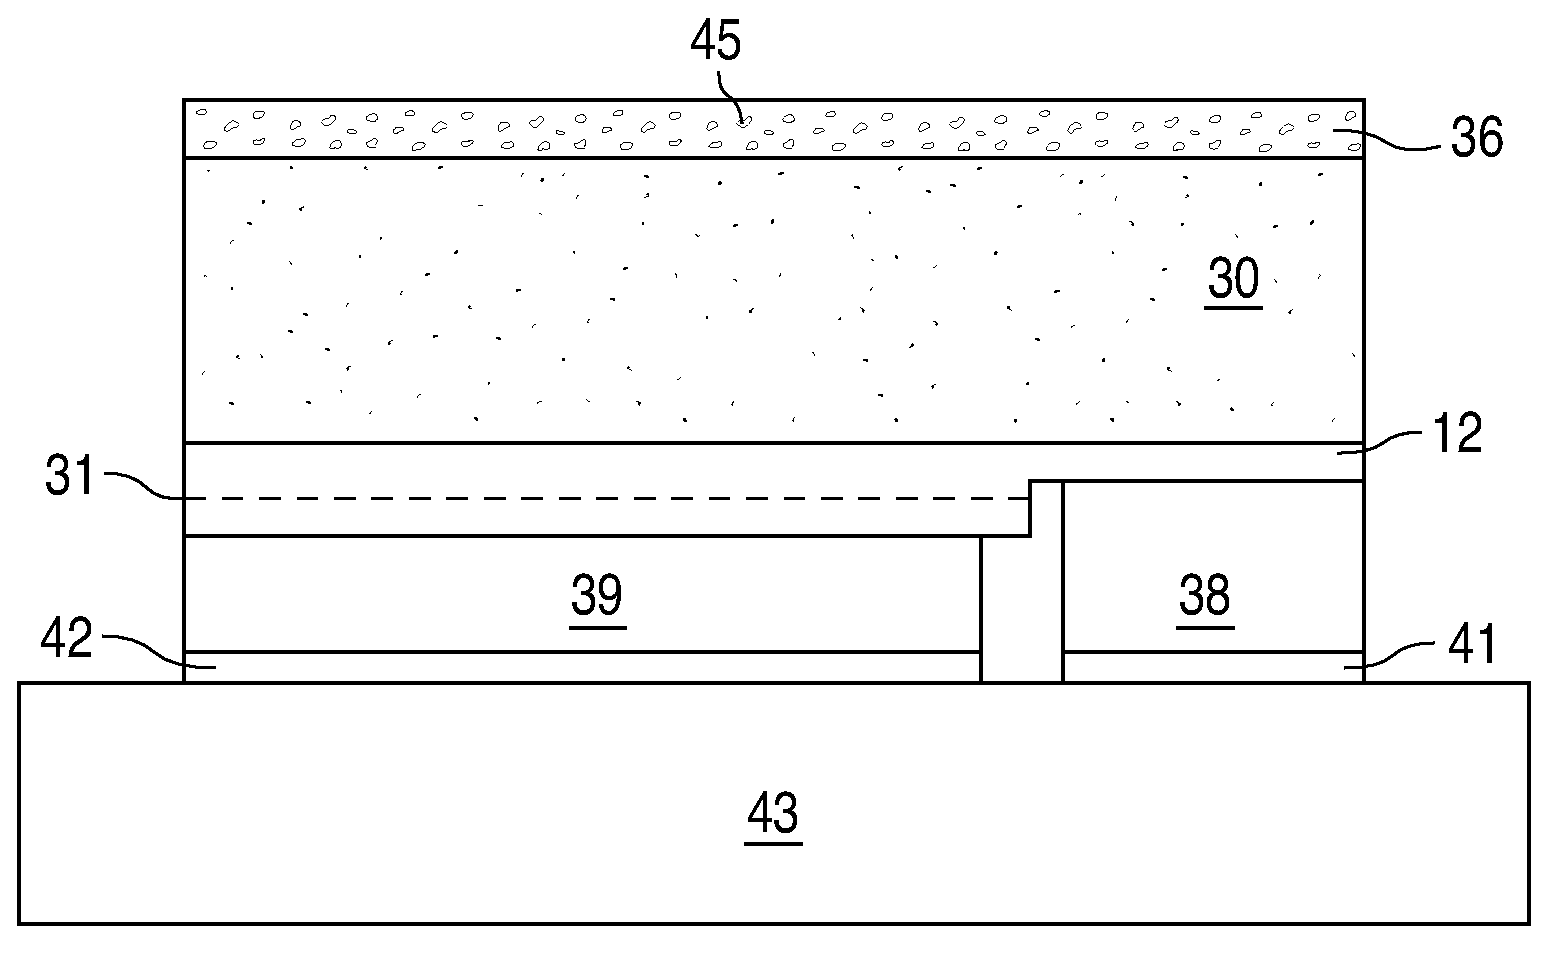 Light emitting device including luminescent ceramic and light-scattering material